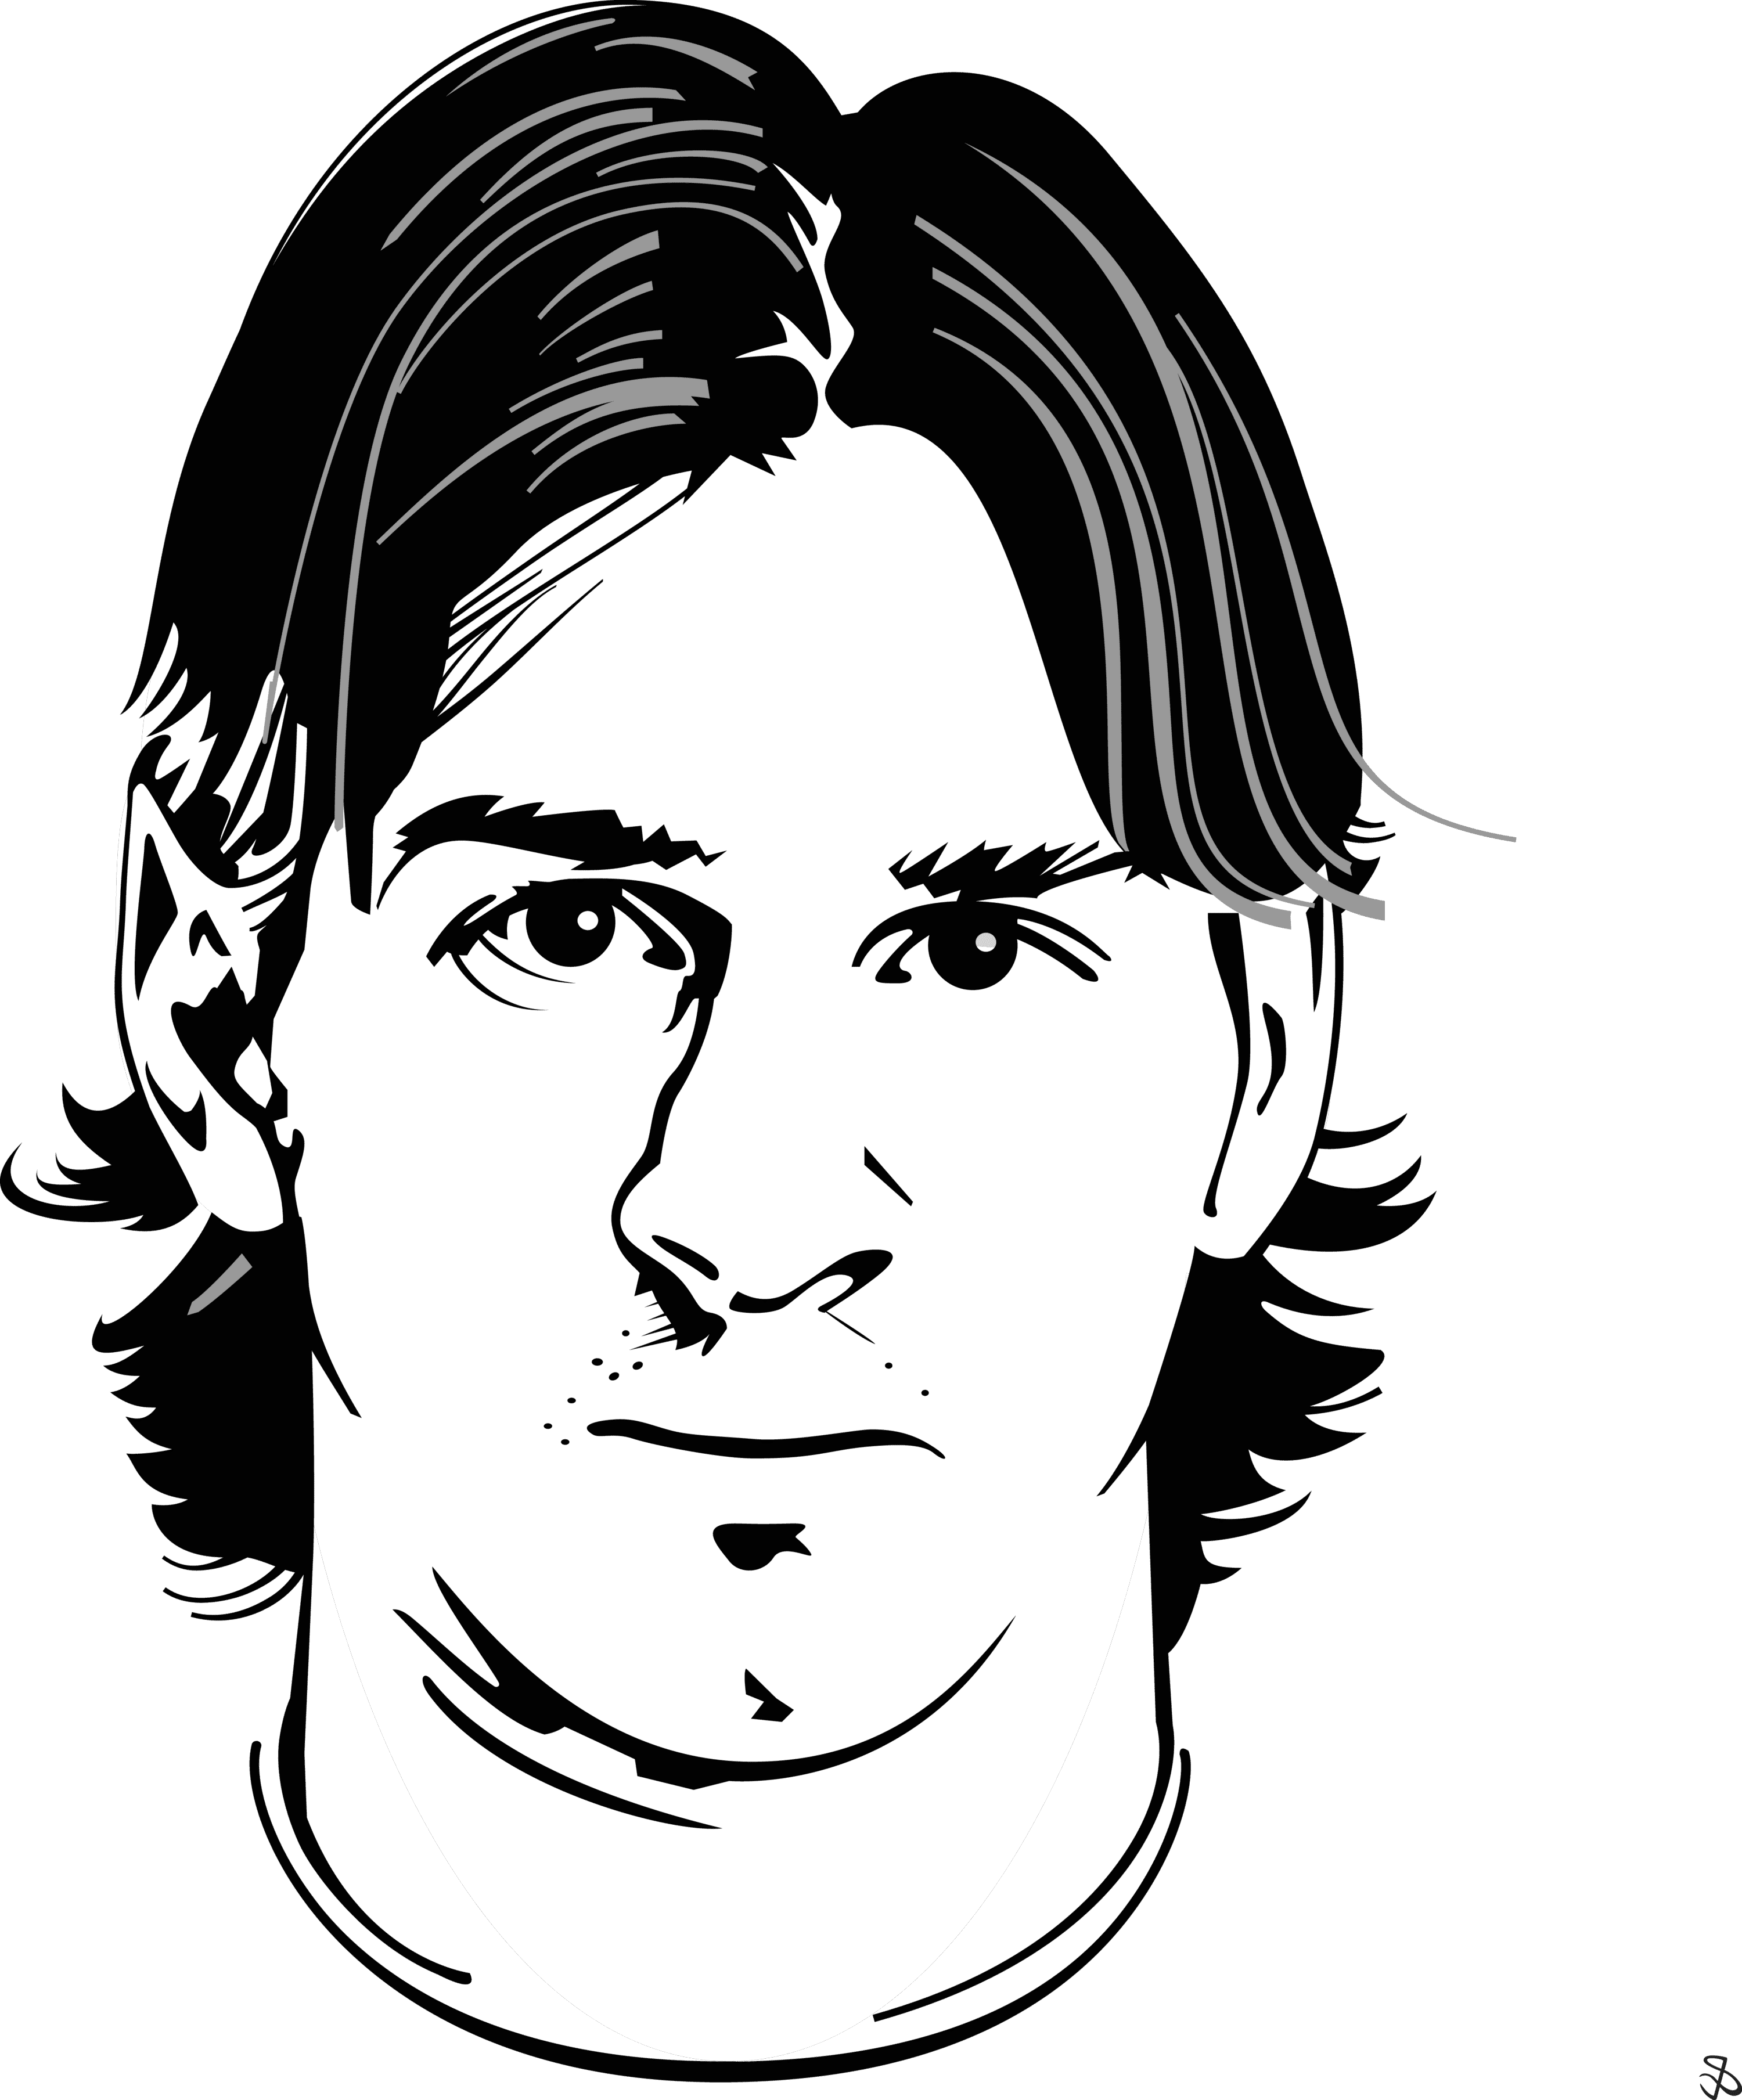 Shanmukh Art - My latest drawing of Messi's iconic... | Facebook